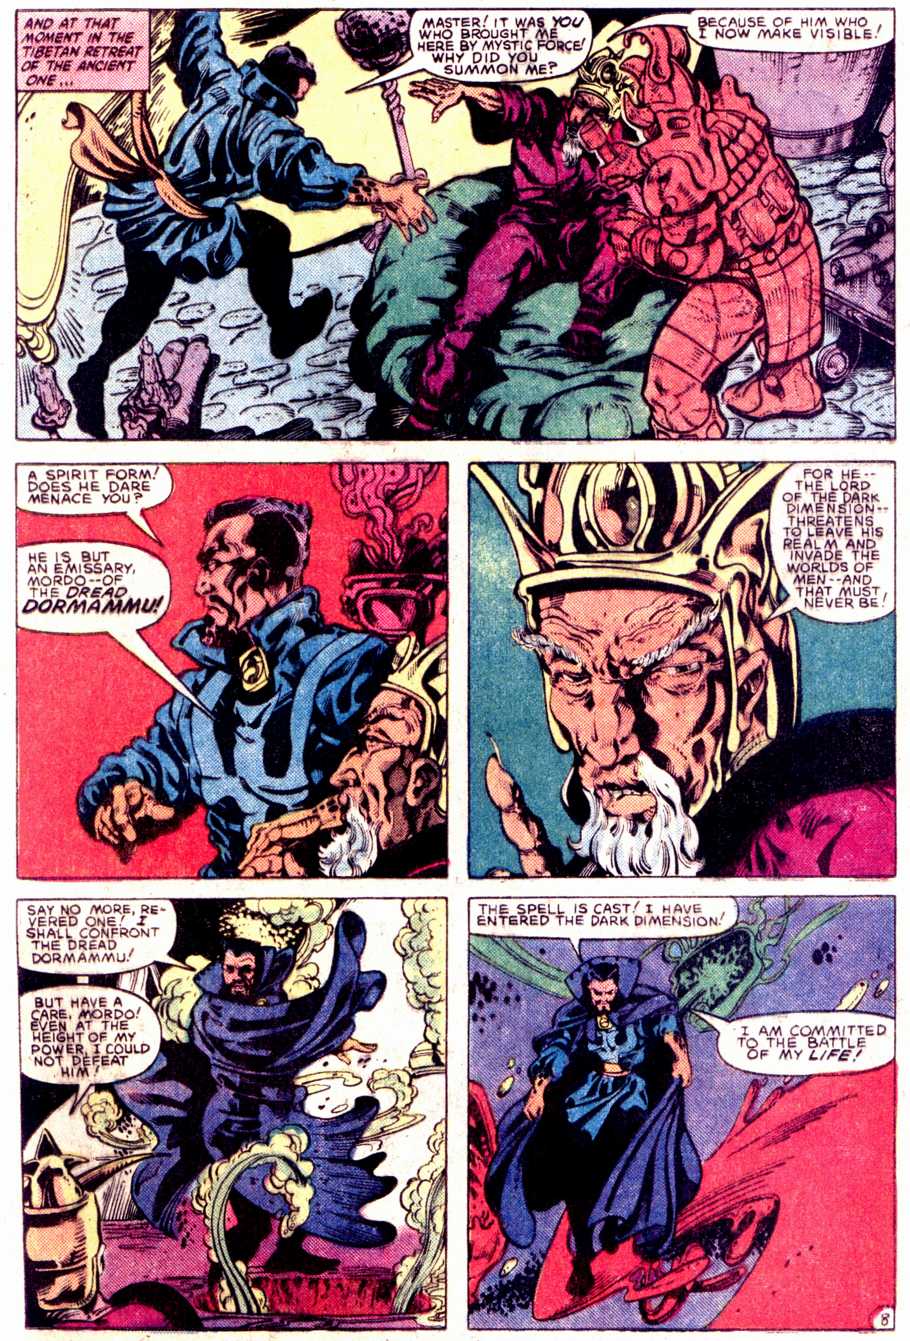 What If? (1977) issue 40 - Dr Strange had not become master of The mystic arts - Page 9